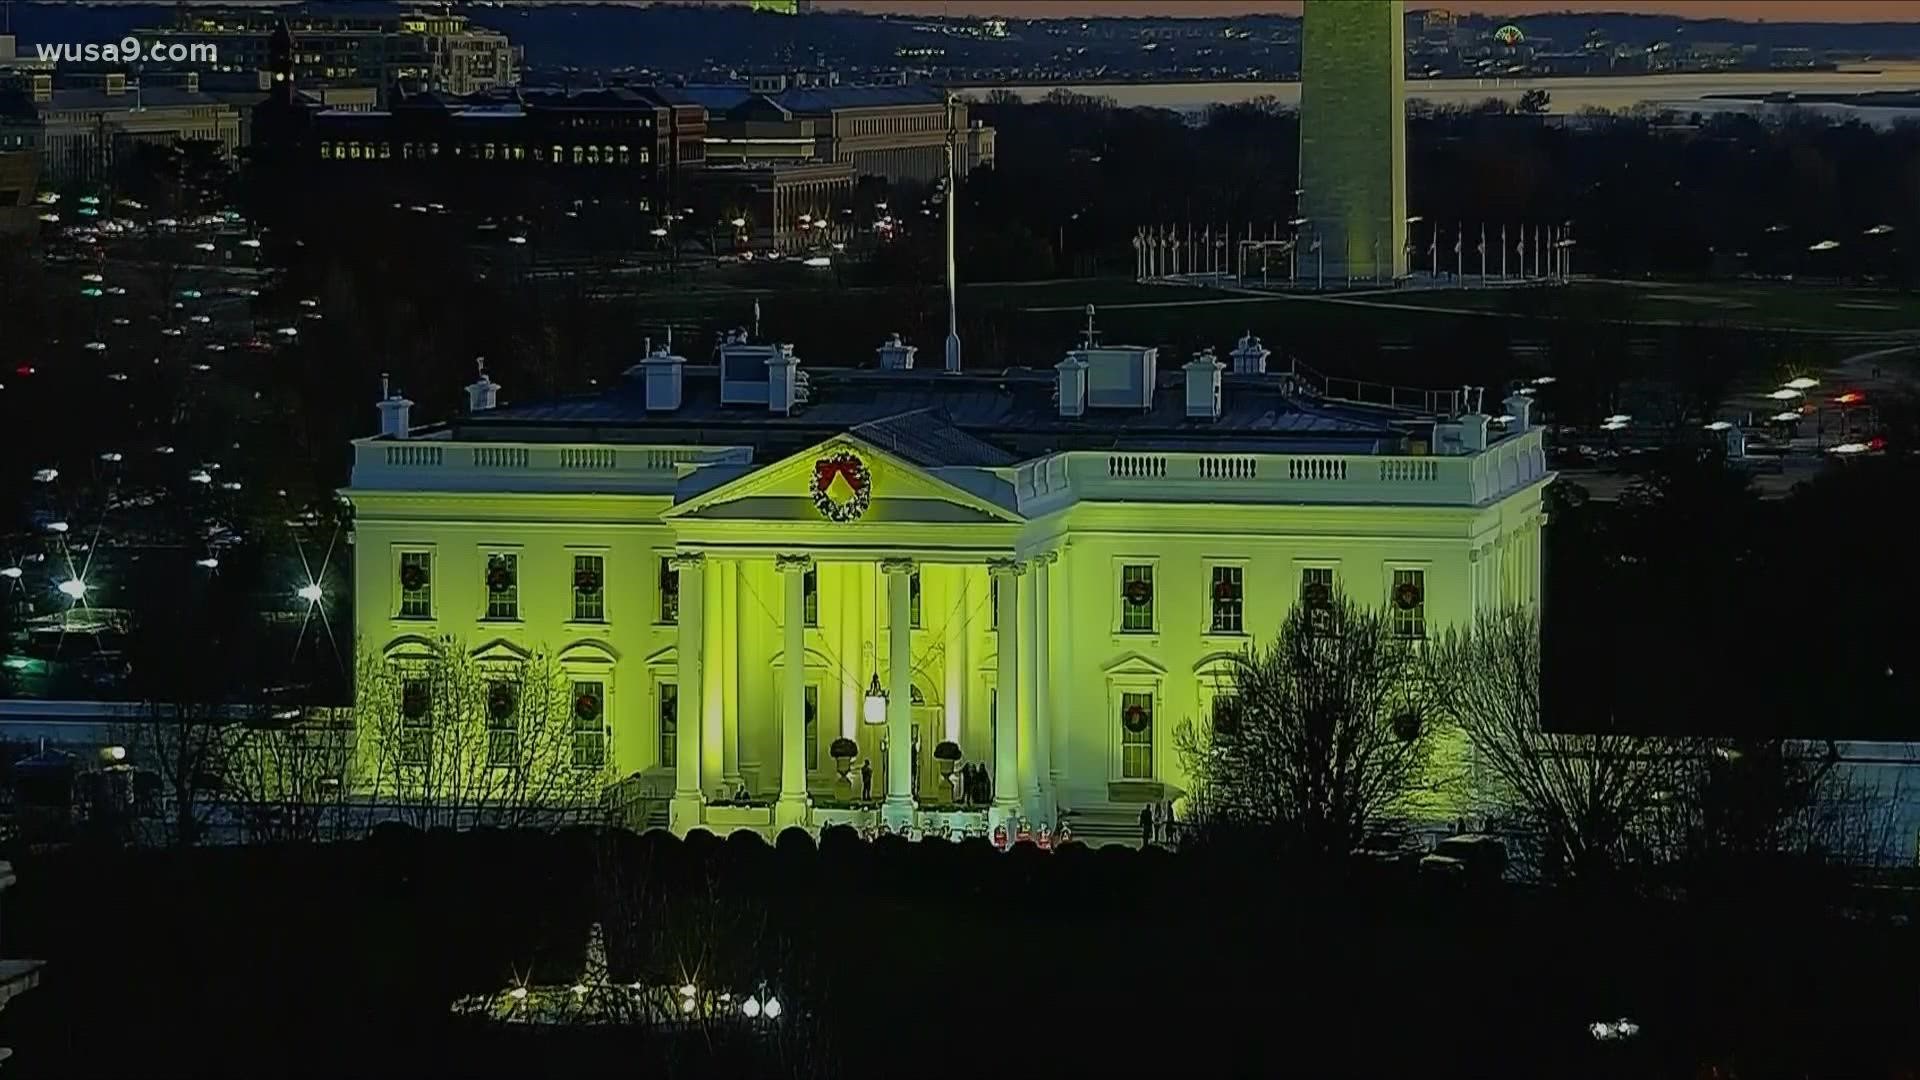 white house lit up in gay pride colors